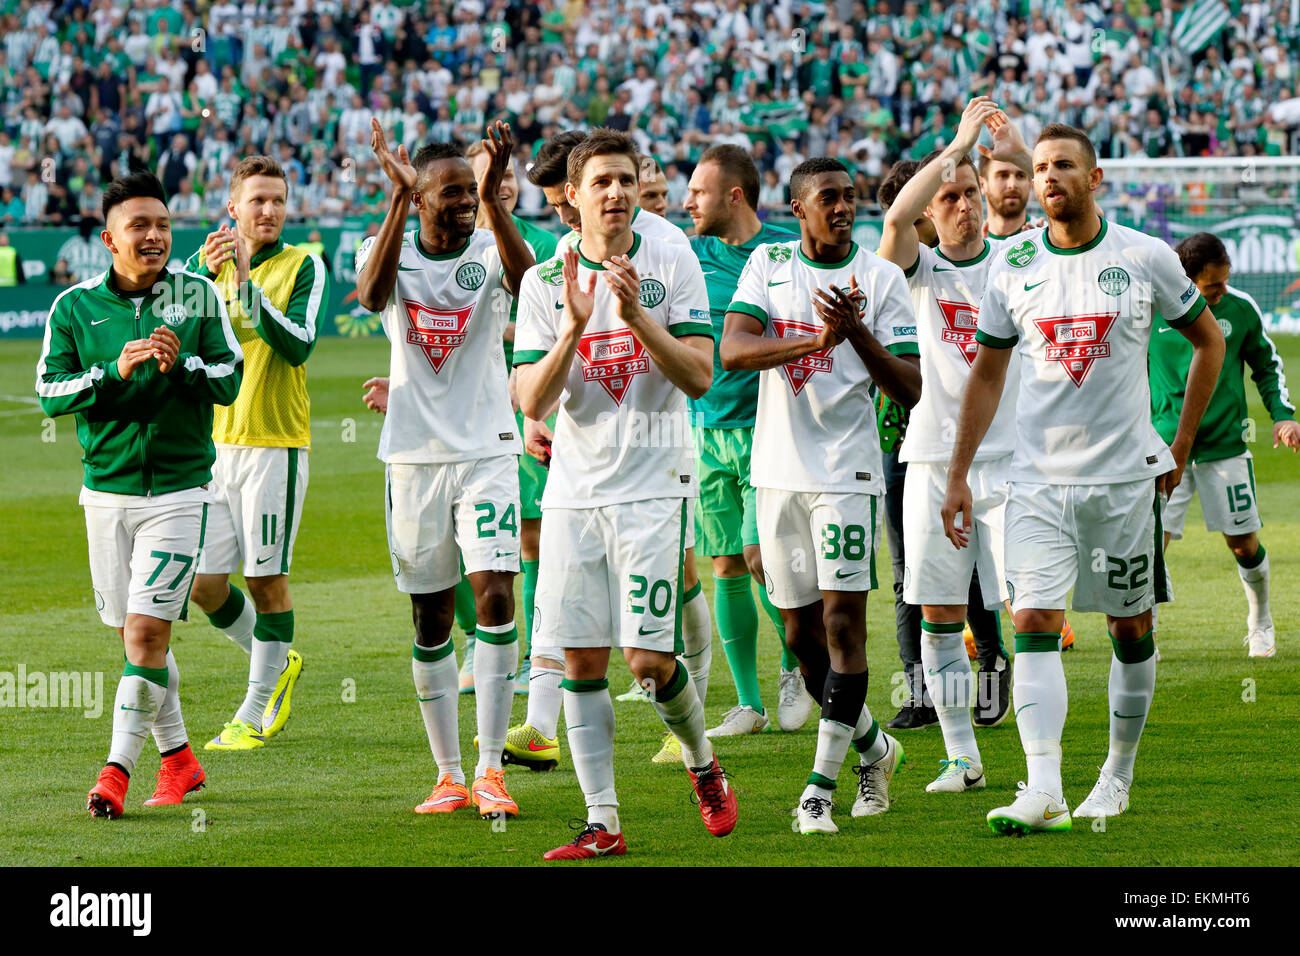 Ferencvaros Football Team High Resolution Stock Photography and Images -  Alamy